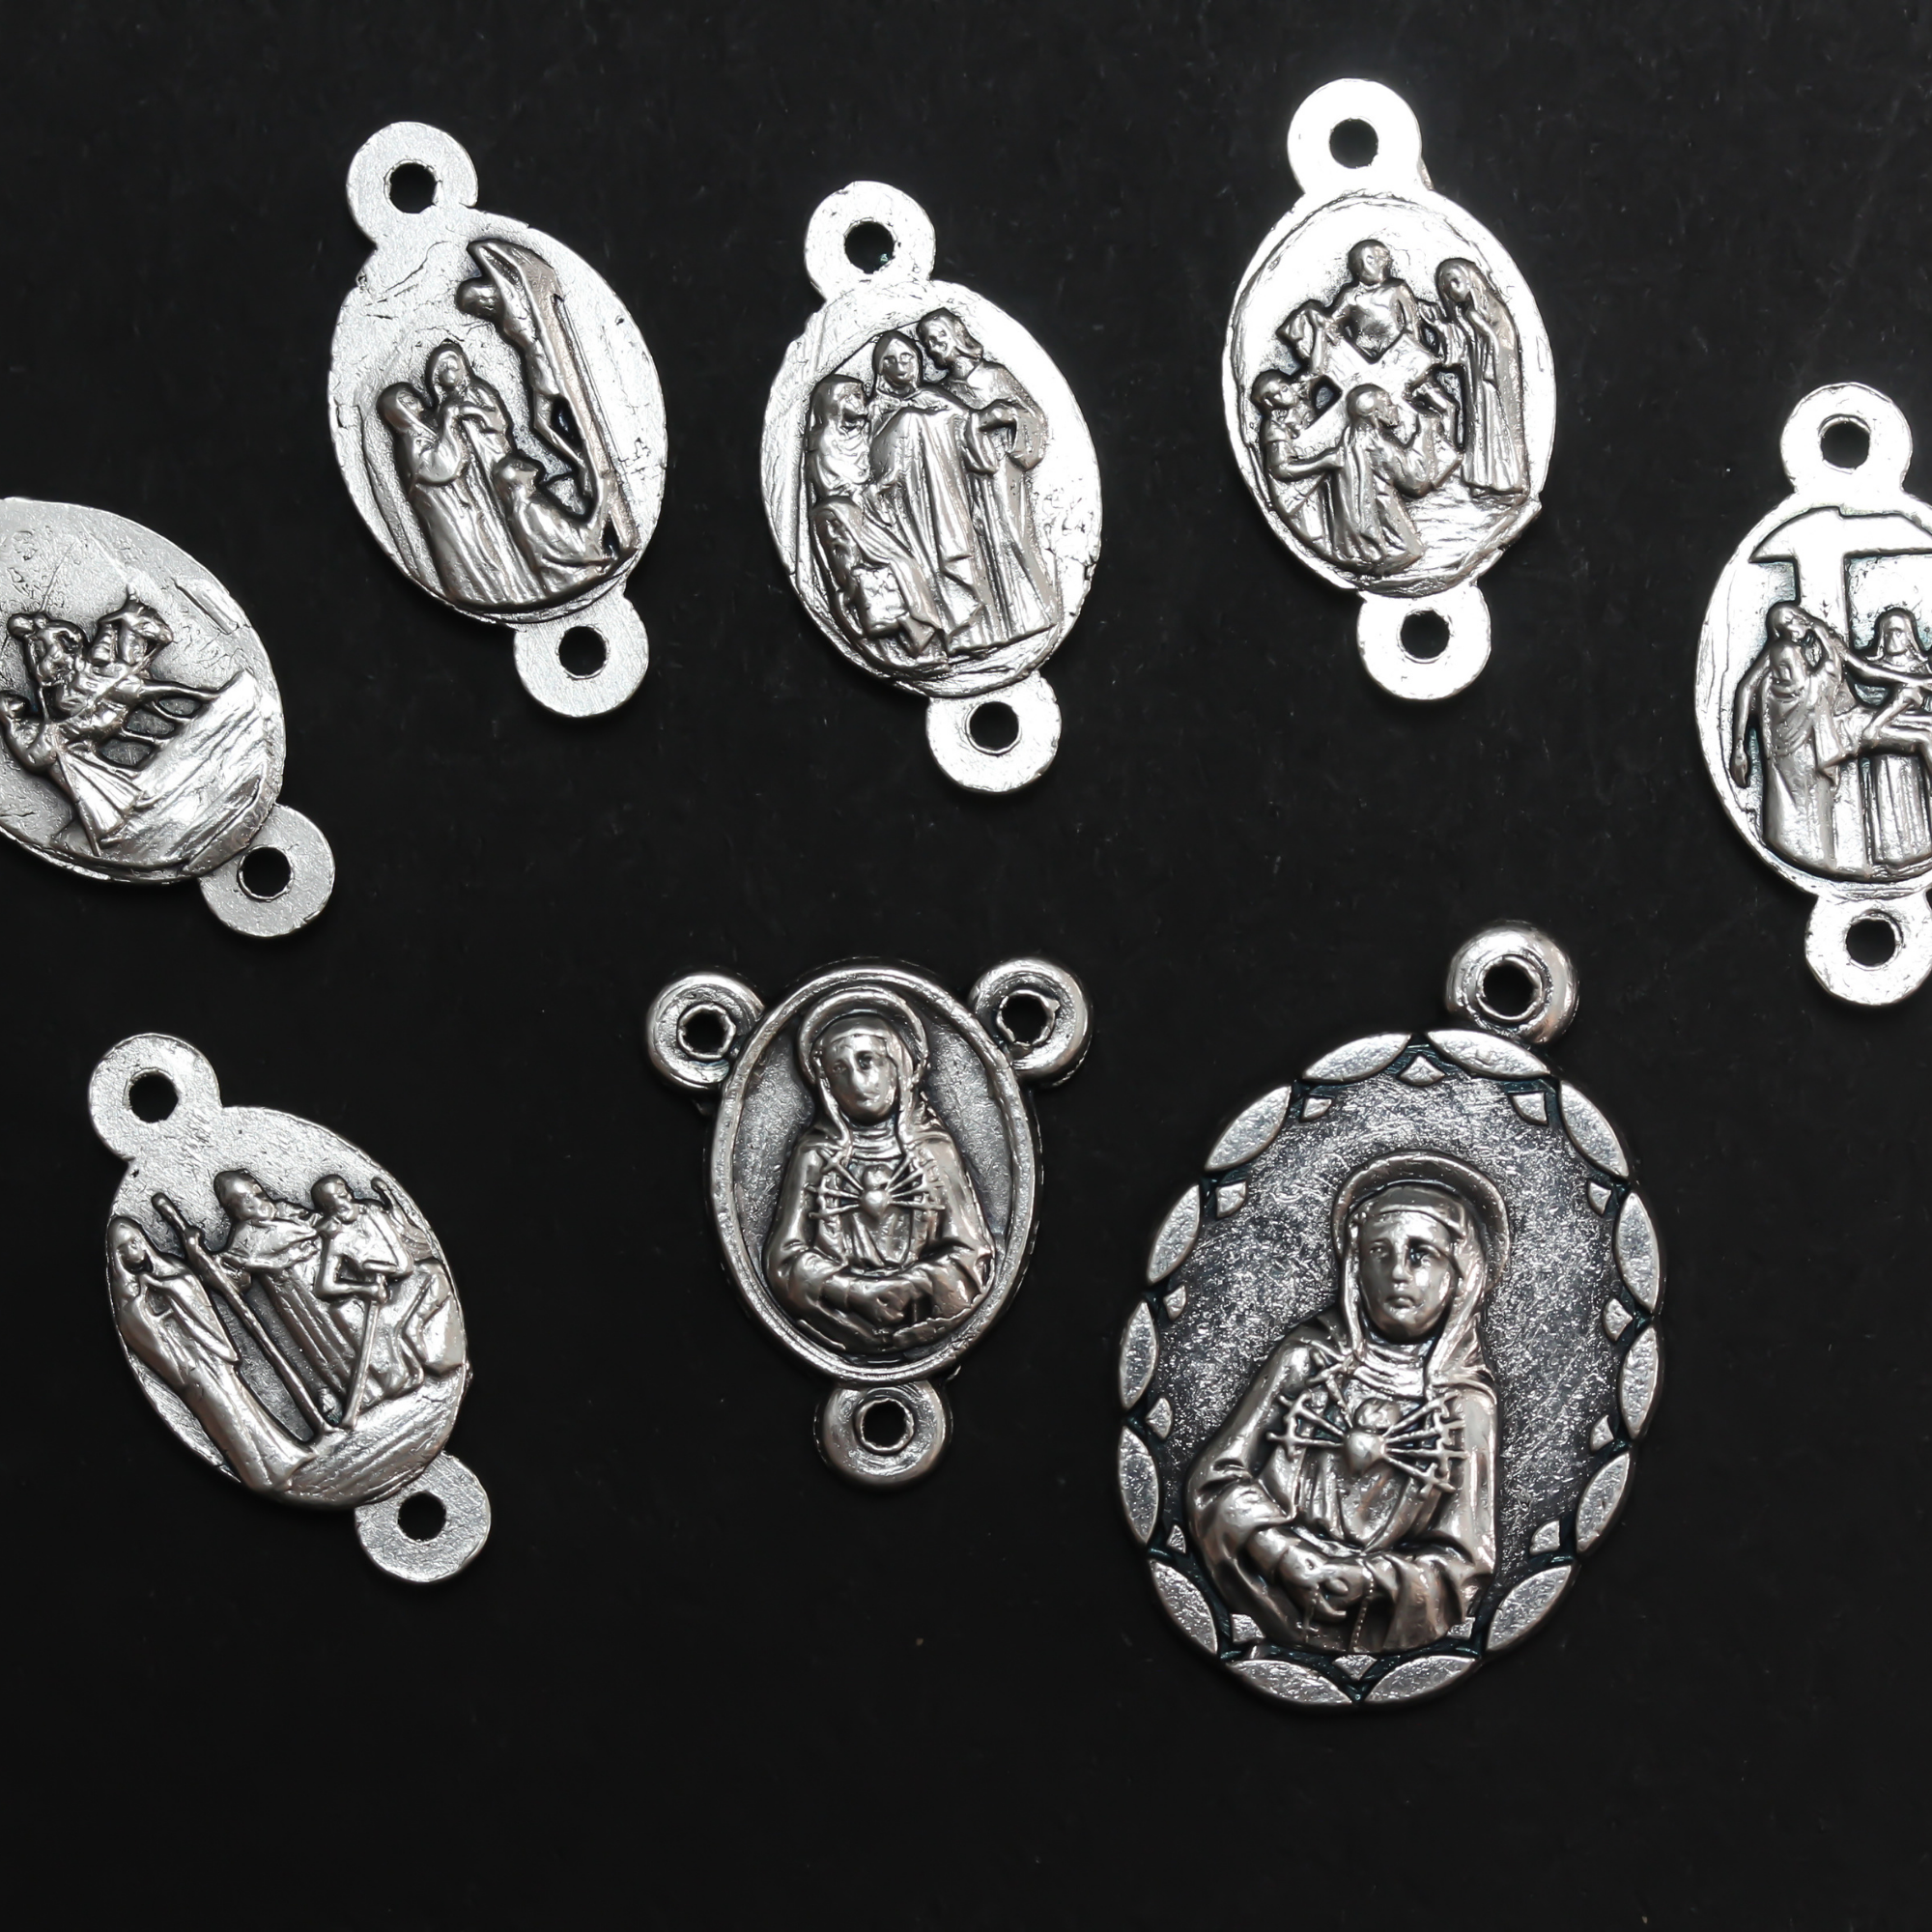 Seven Sorrows rosary making set of 8 medals. Silver oxidized, made in Italy